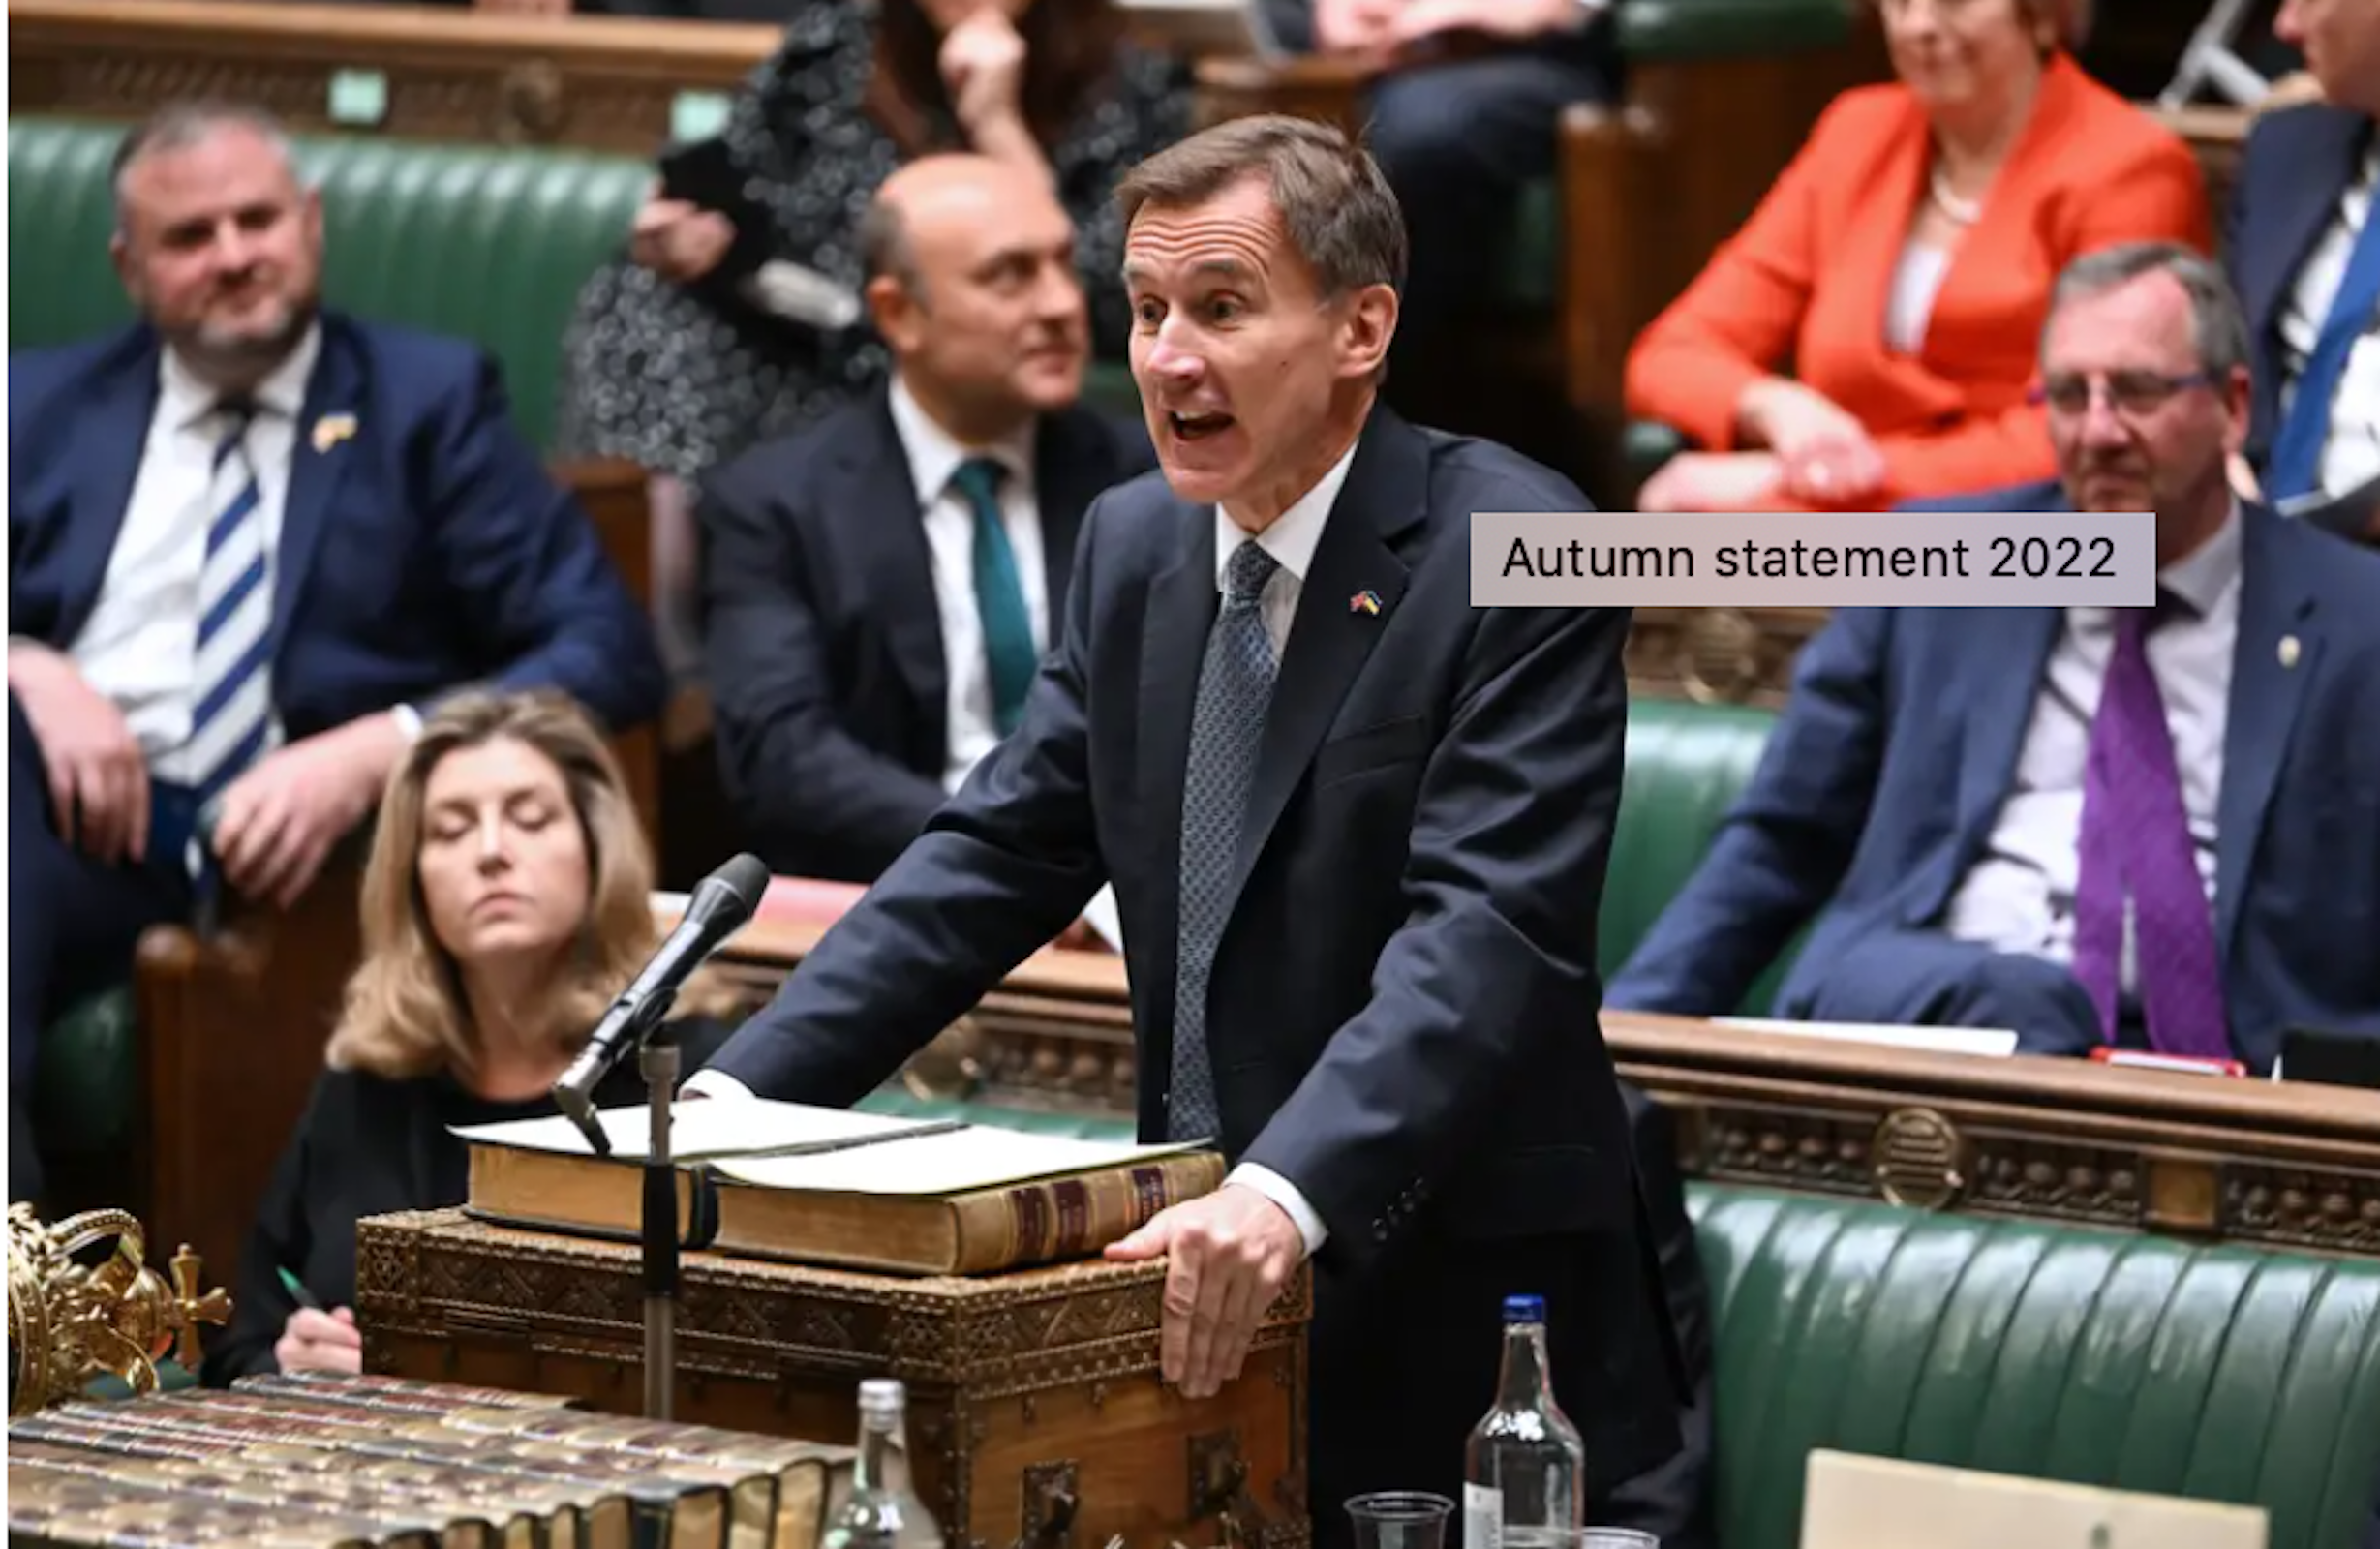 Hunt pledges to make UK ‘the world’s next Silicon Valley’ in Autumn Statement